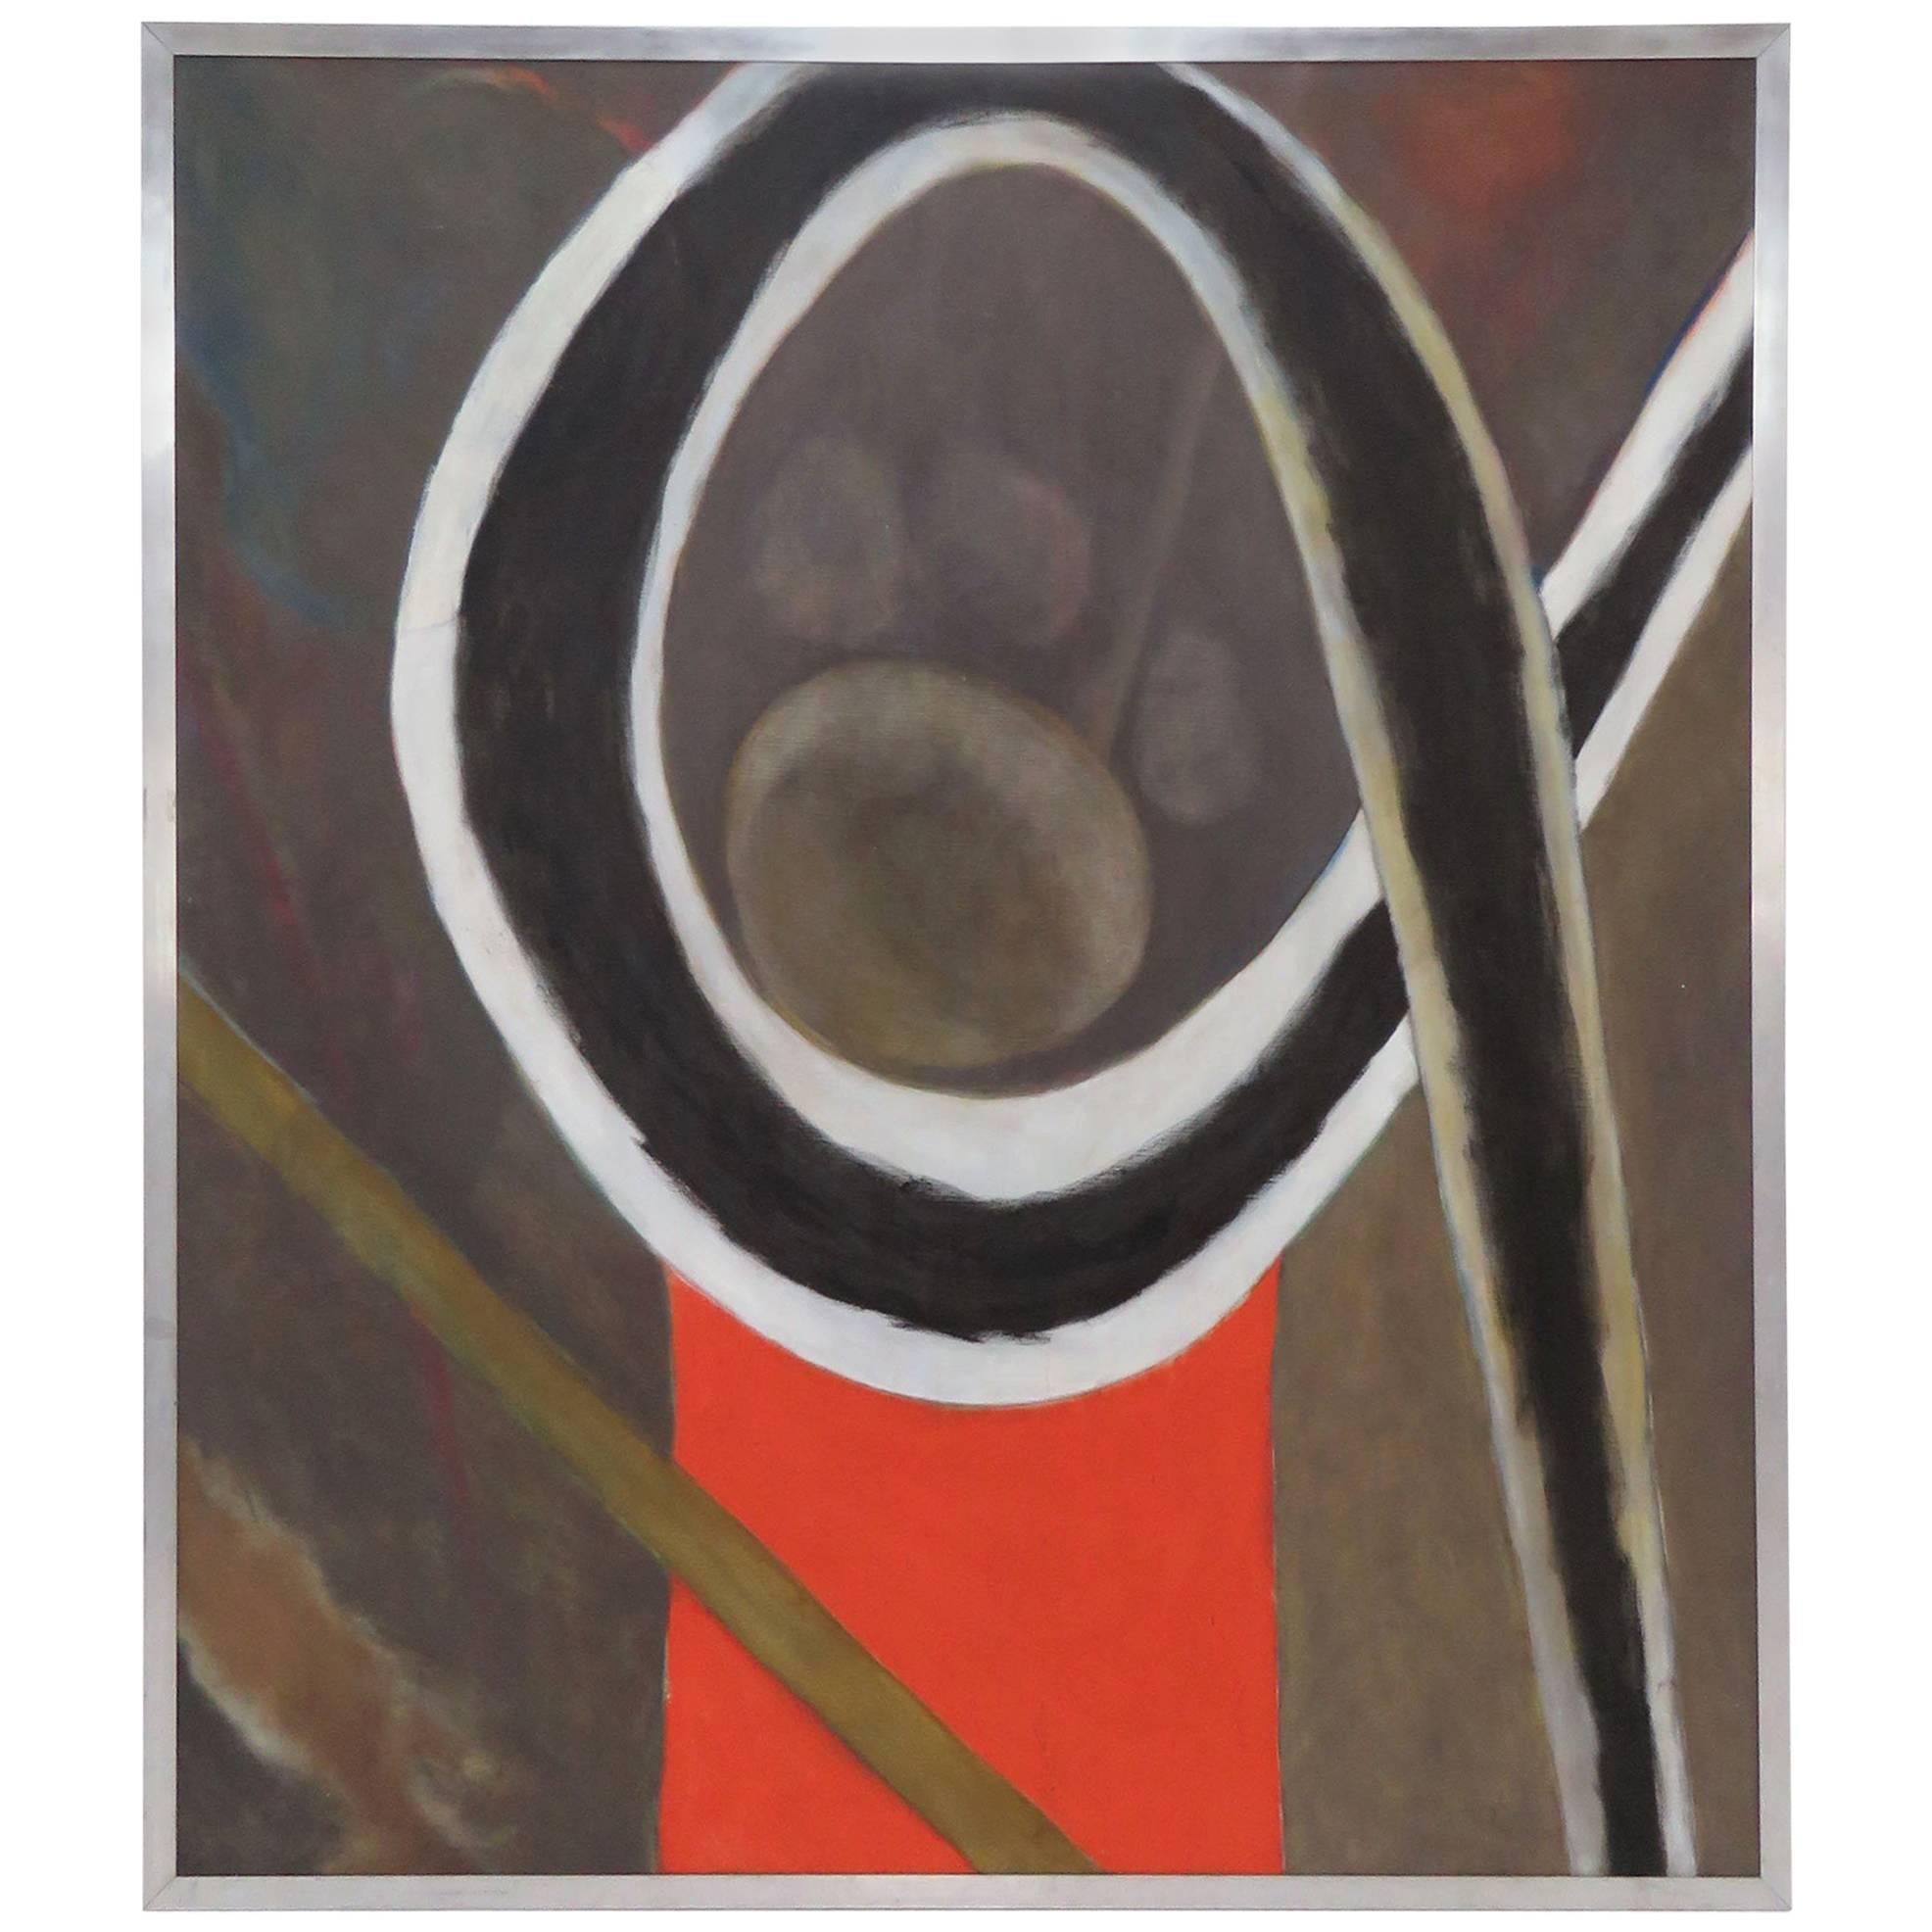 Large Abstract Oil Painting Titled "U.v. ix" by Polly Doyle, 1973